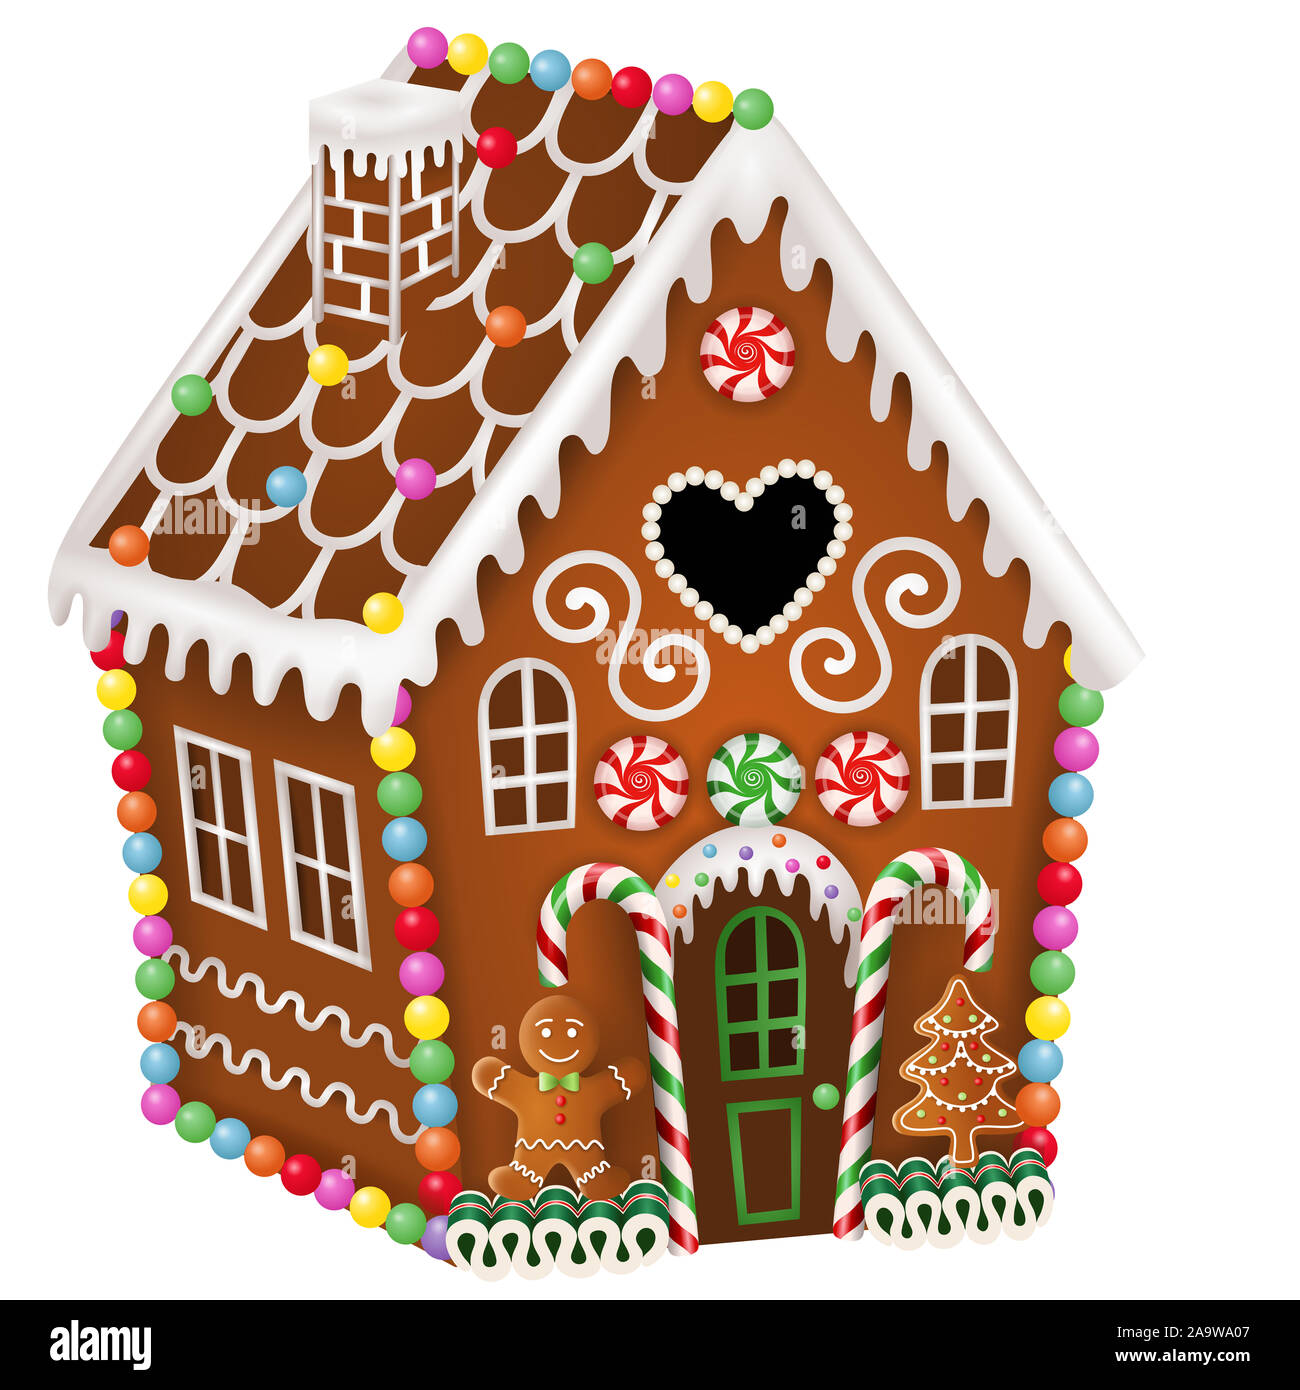 Gingerbread house illustration sweet candies chocolate Cut Out Stock ...